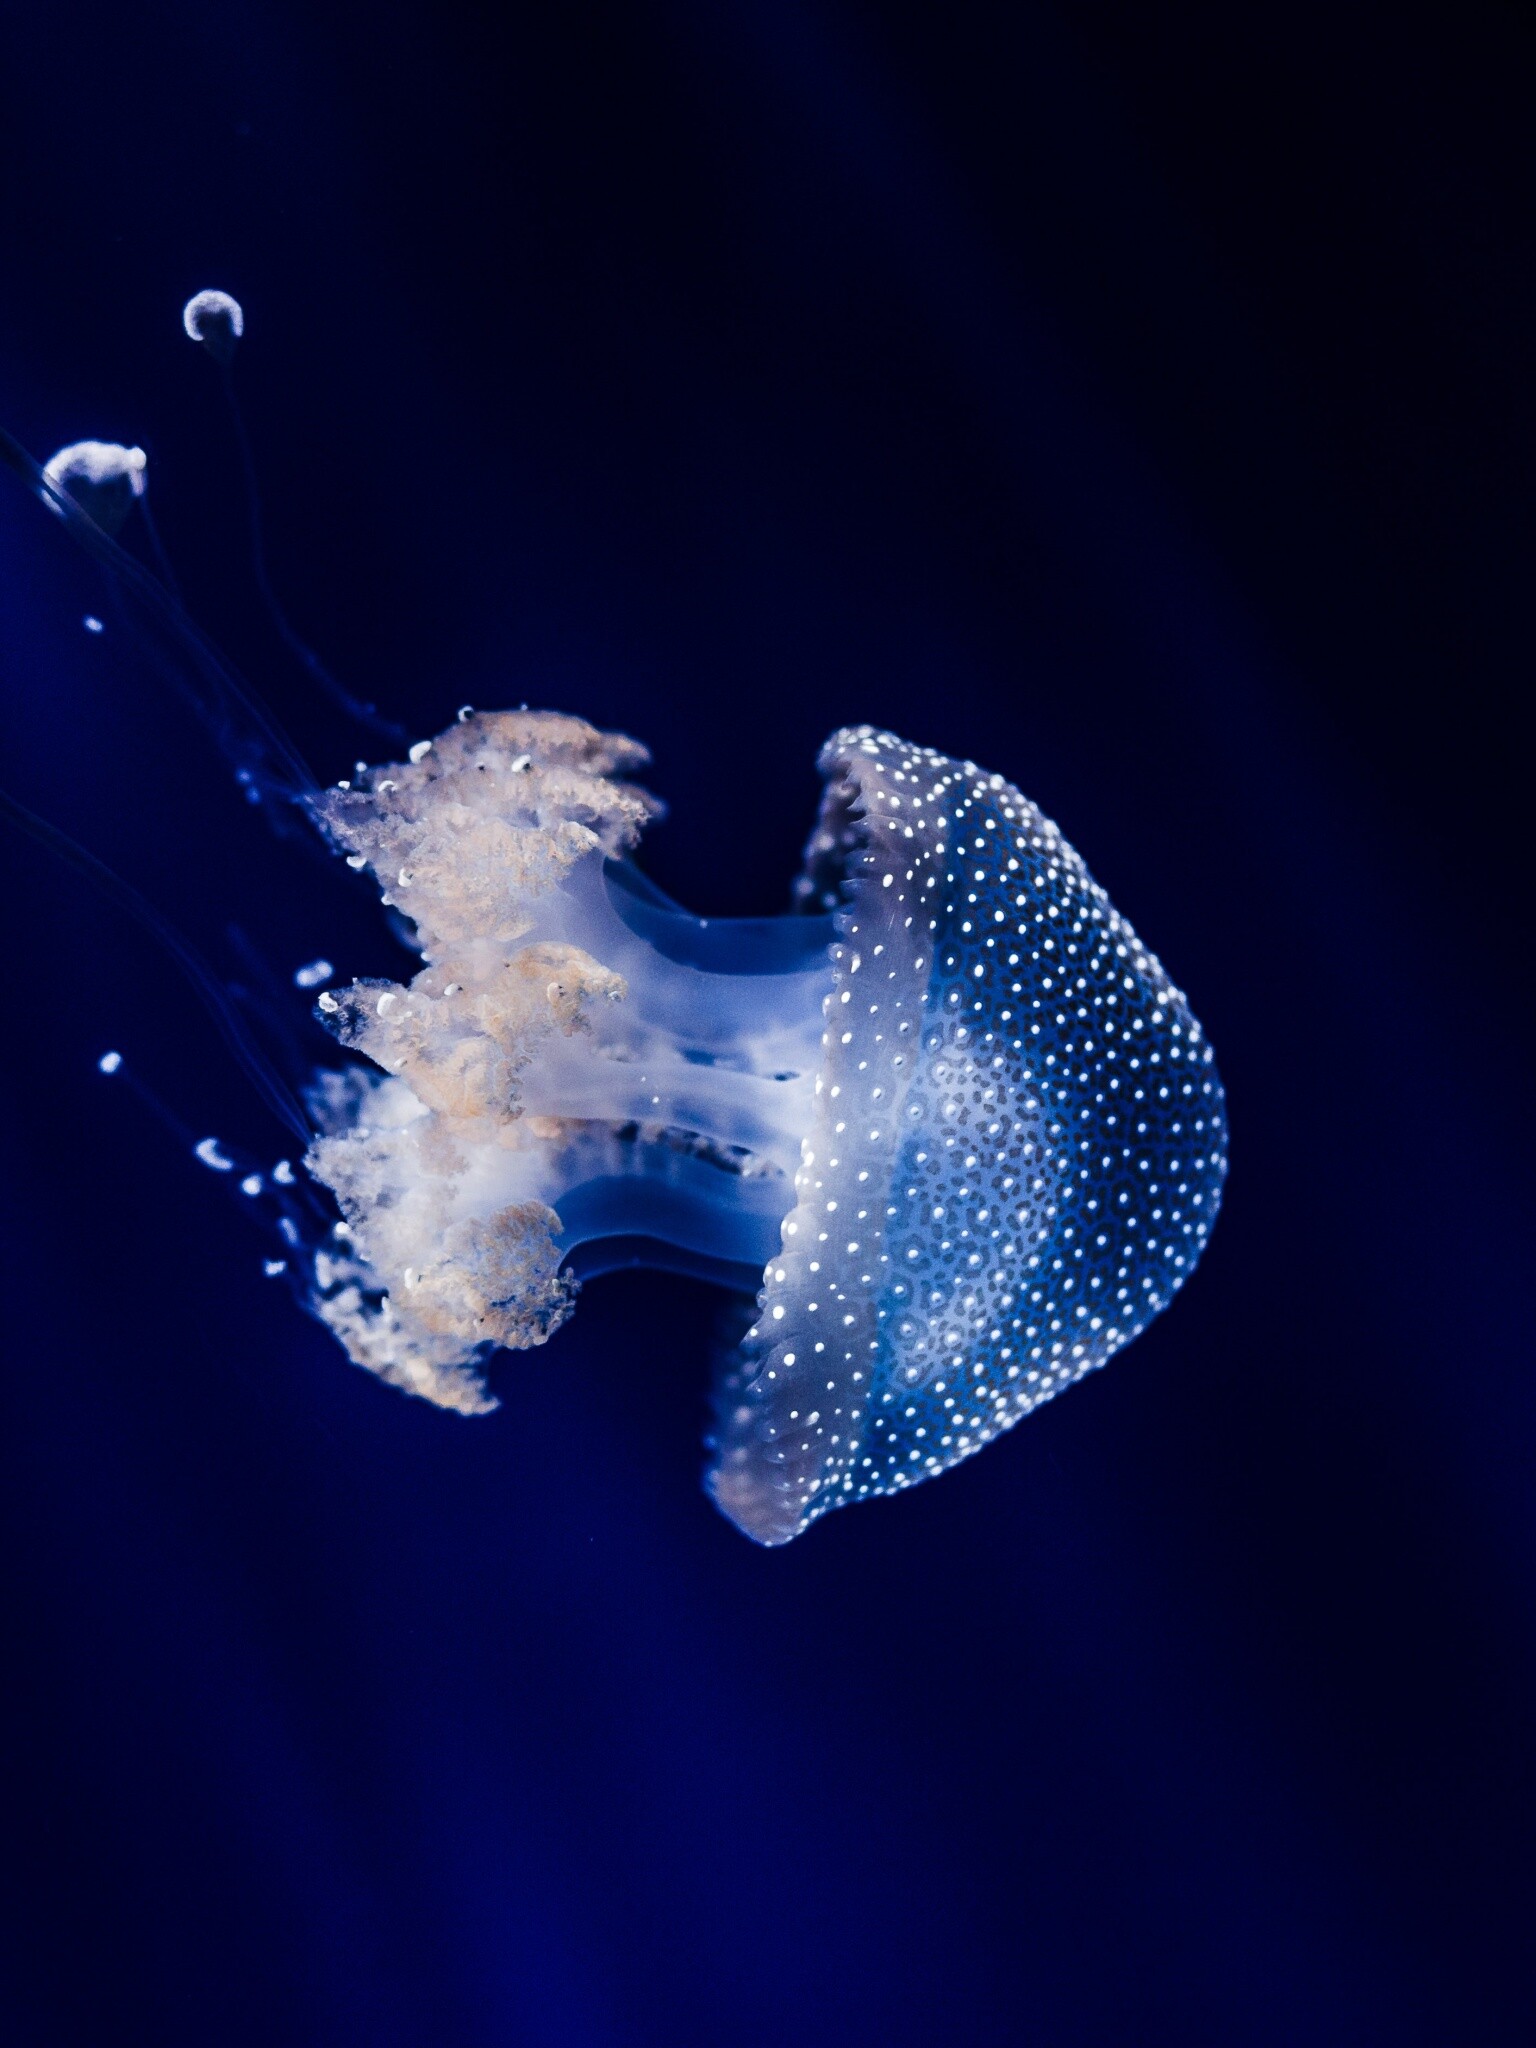 Glowing Jellyfish: Sea life, Phyllorhiza punctata known as a floating bell, The medusa stage. 1540x2050 HD Wallpaper.